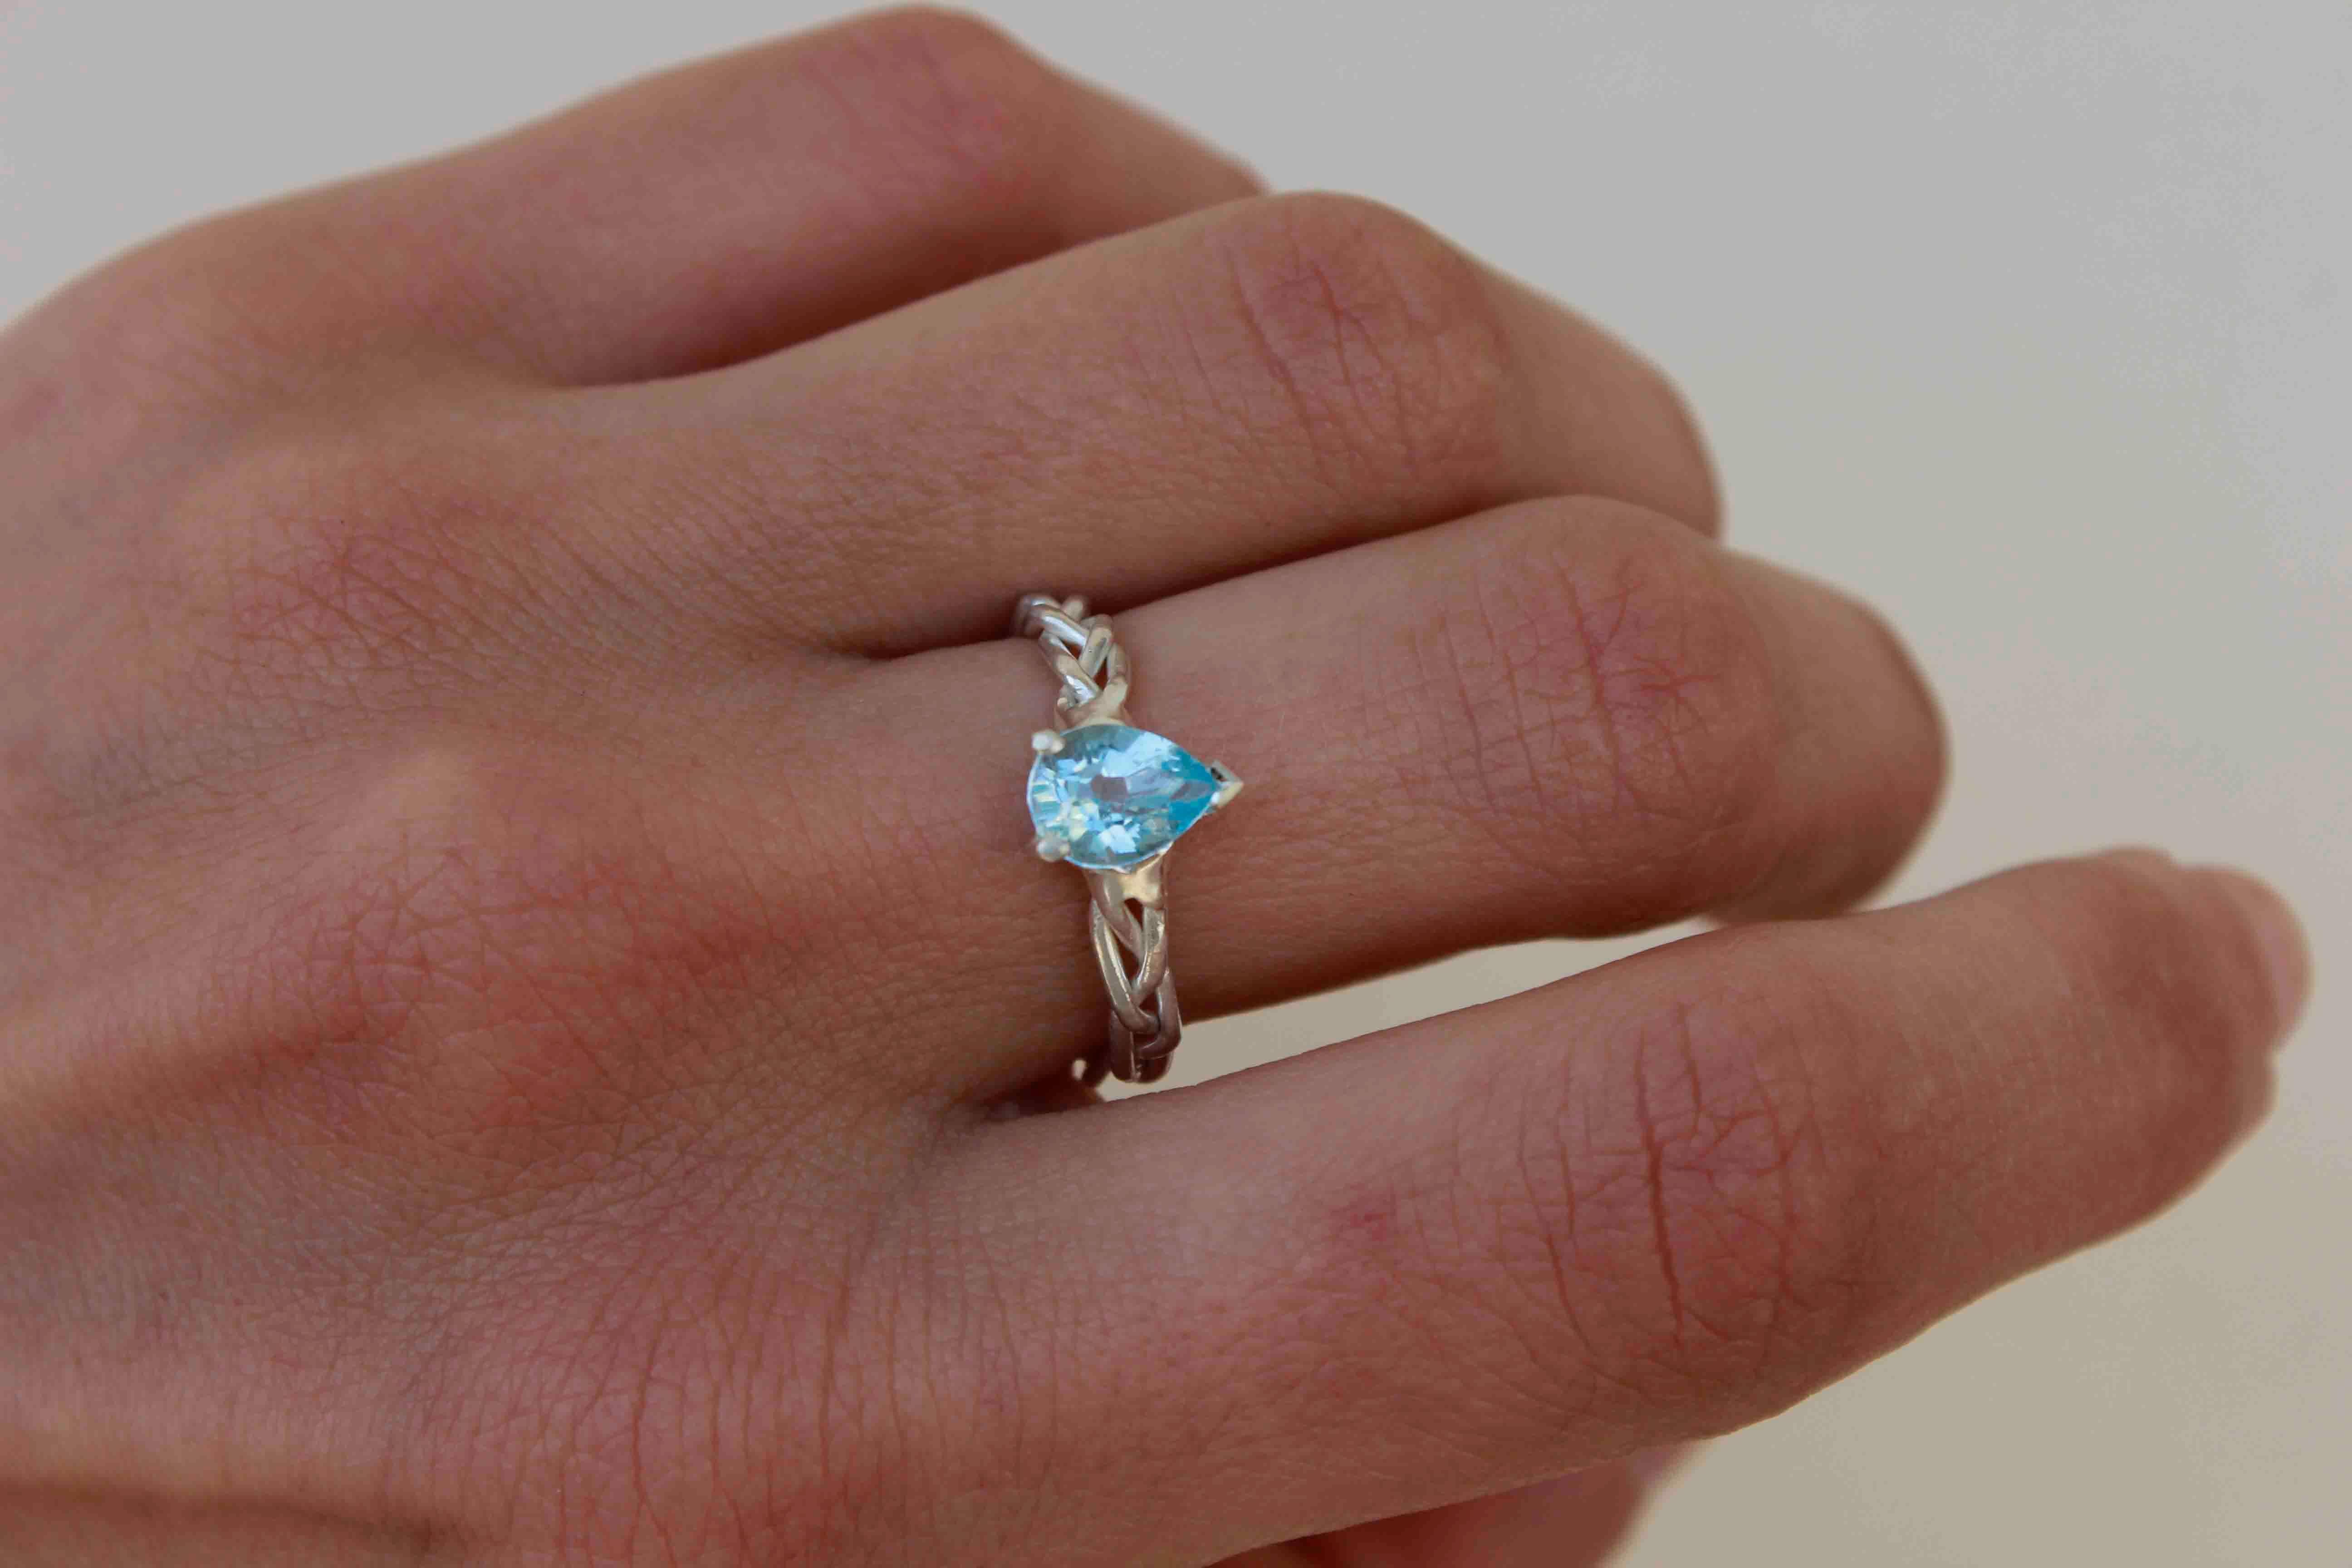 Blue Topaz Silver Ring

A romantic, yet statement ring featuring a blue topaz pear stone.

A lovely sea-blue stone, with a unique handmade braided band.

Stone size 6×8 mm

Your ring will be made to order in your size, so please leave me your size